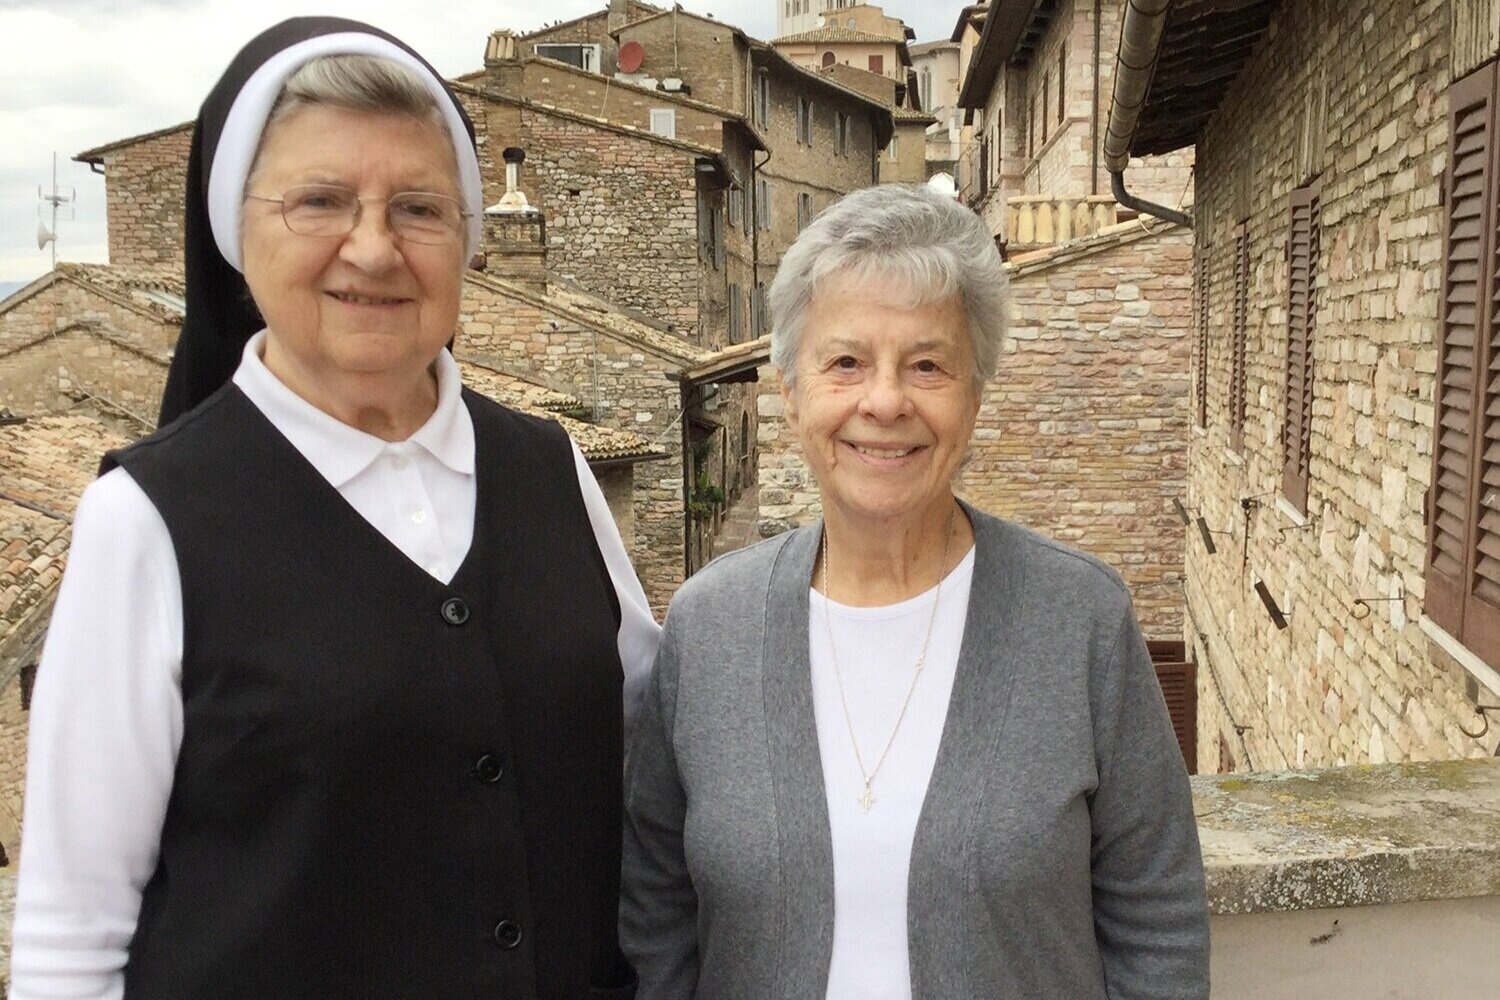  Sister Jeanne Marie Ulica (left) shows Sister Marie Therese Sherwood around Assisi in Italy. 